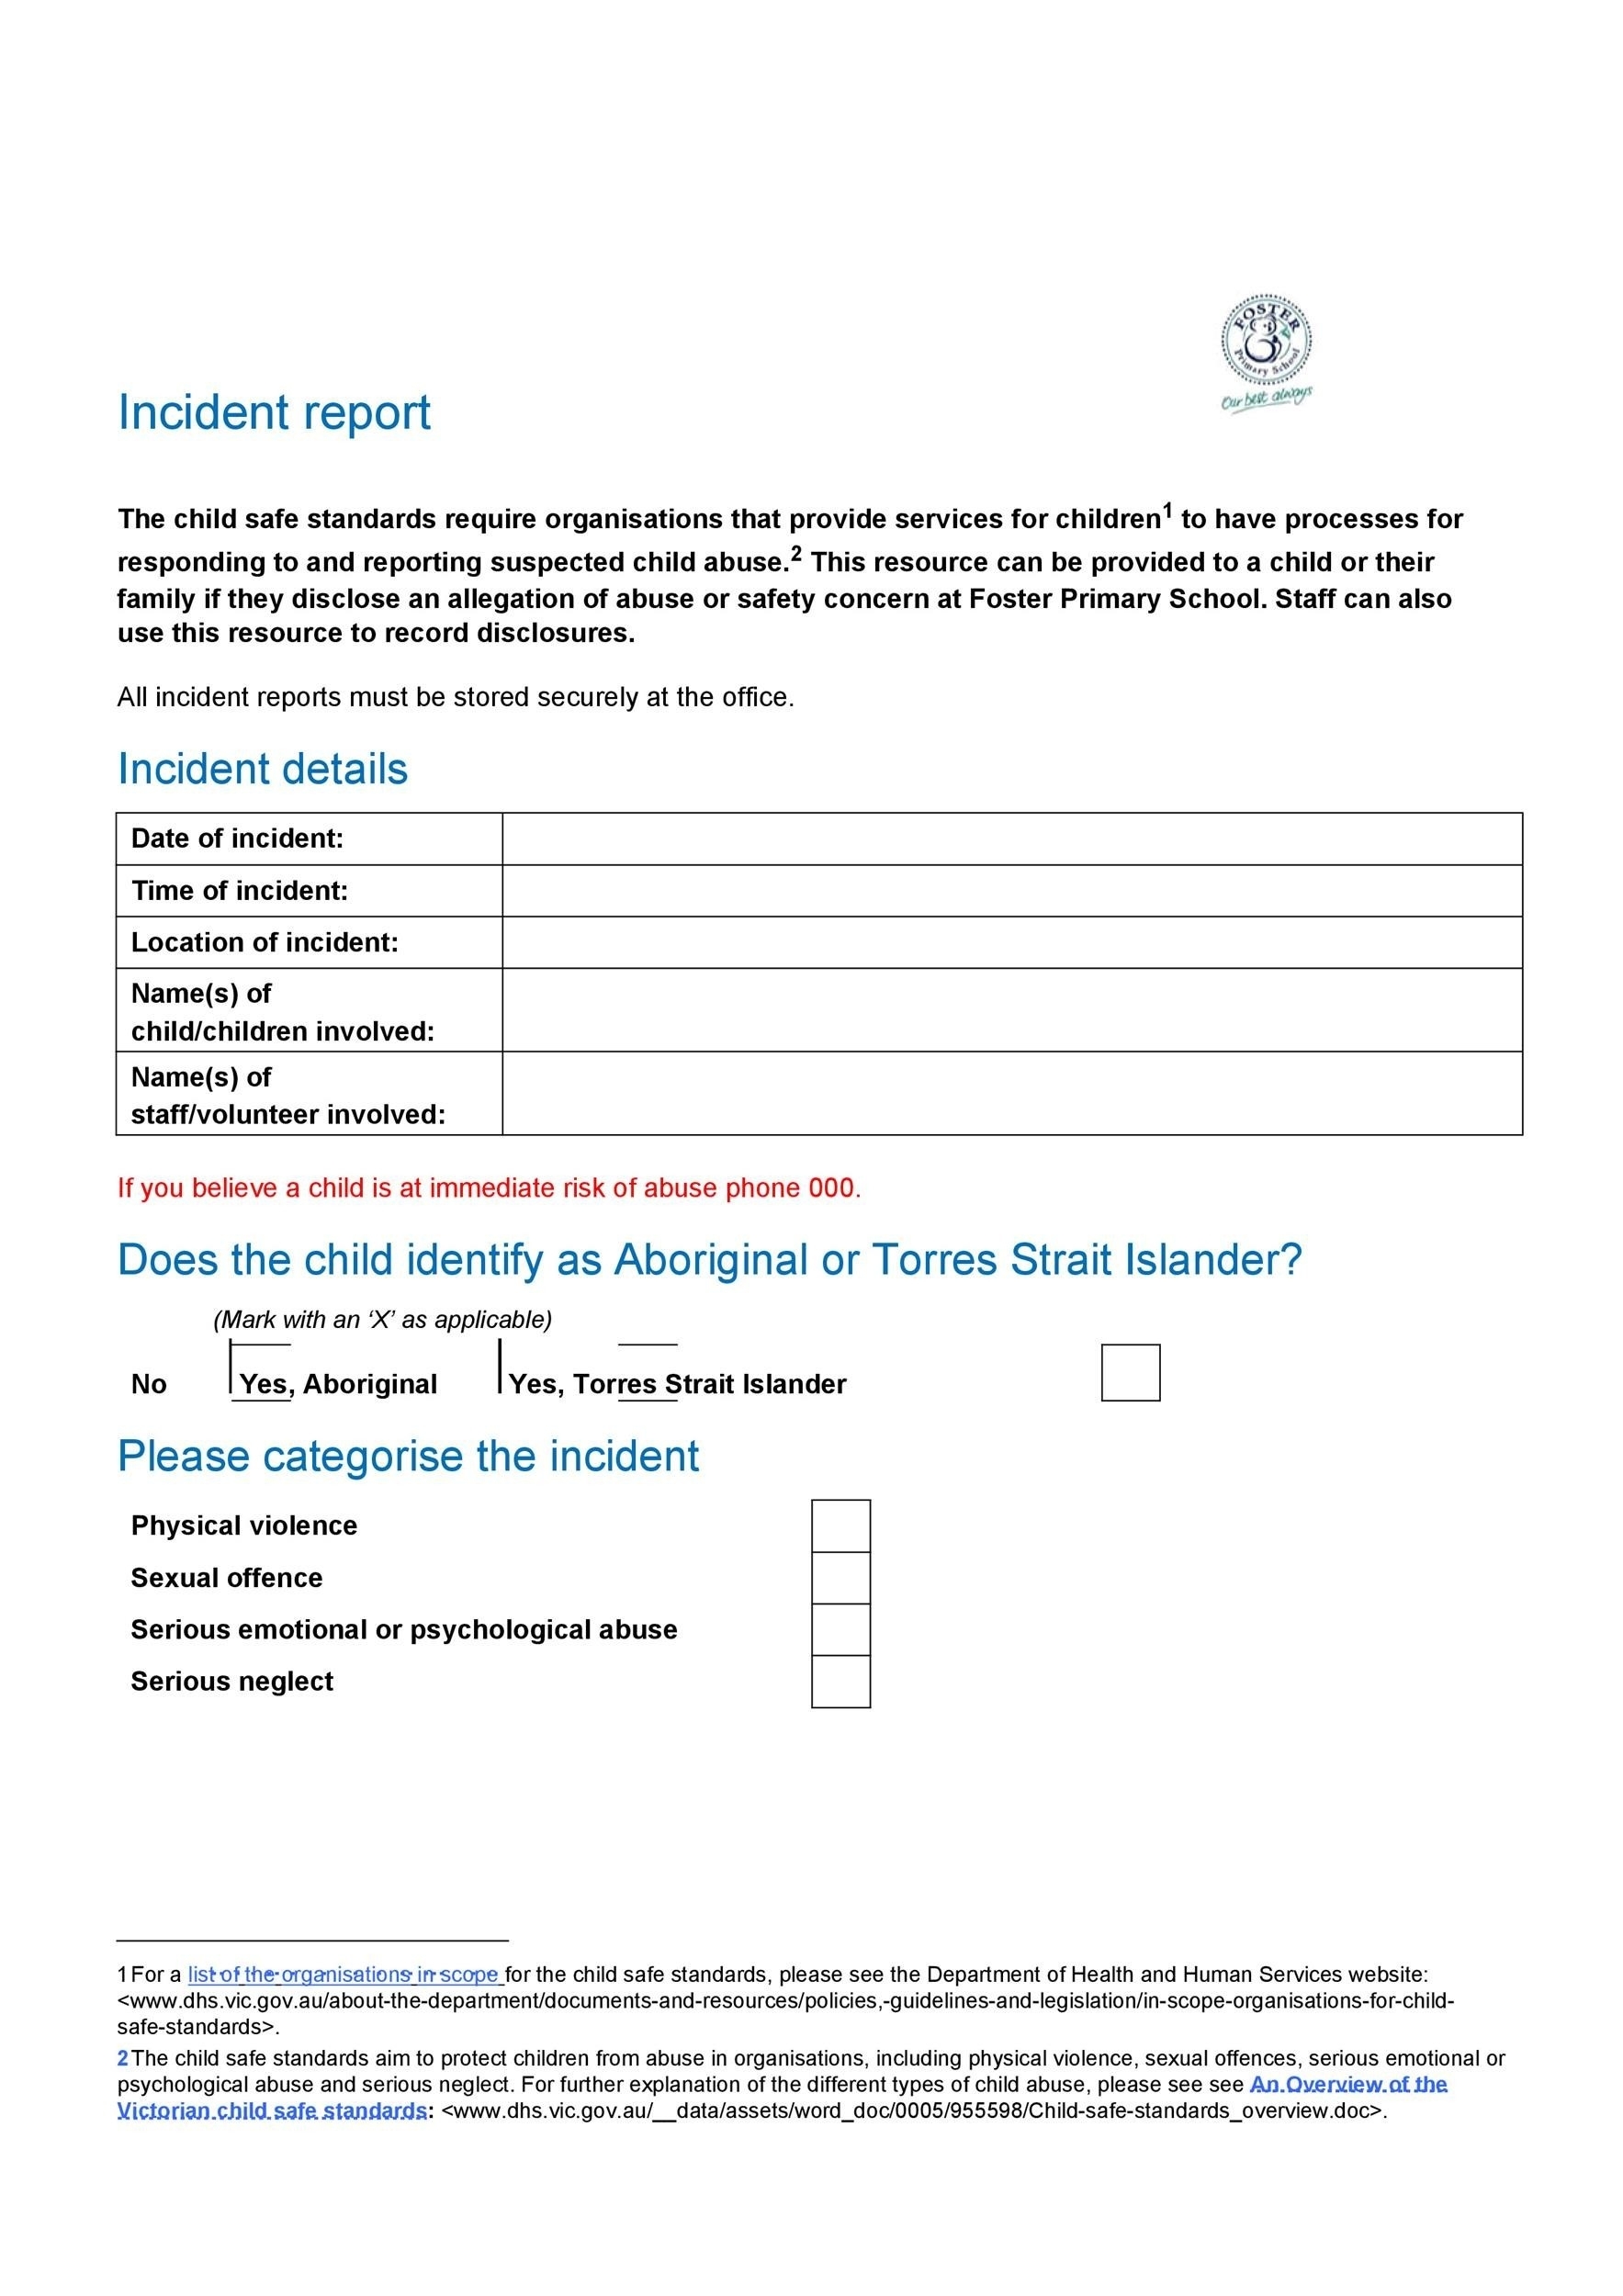 60+ Incident Report Template [Employee, Police, Generic] ᐅ Templatelab Throughout Generic Incident Report Template